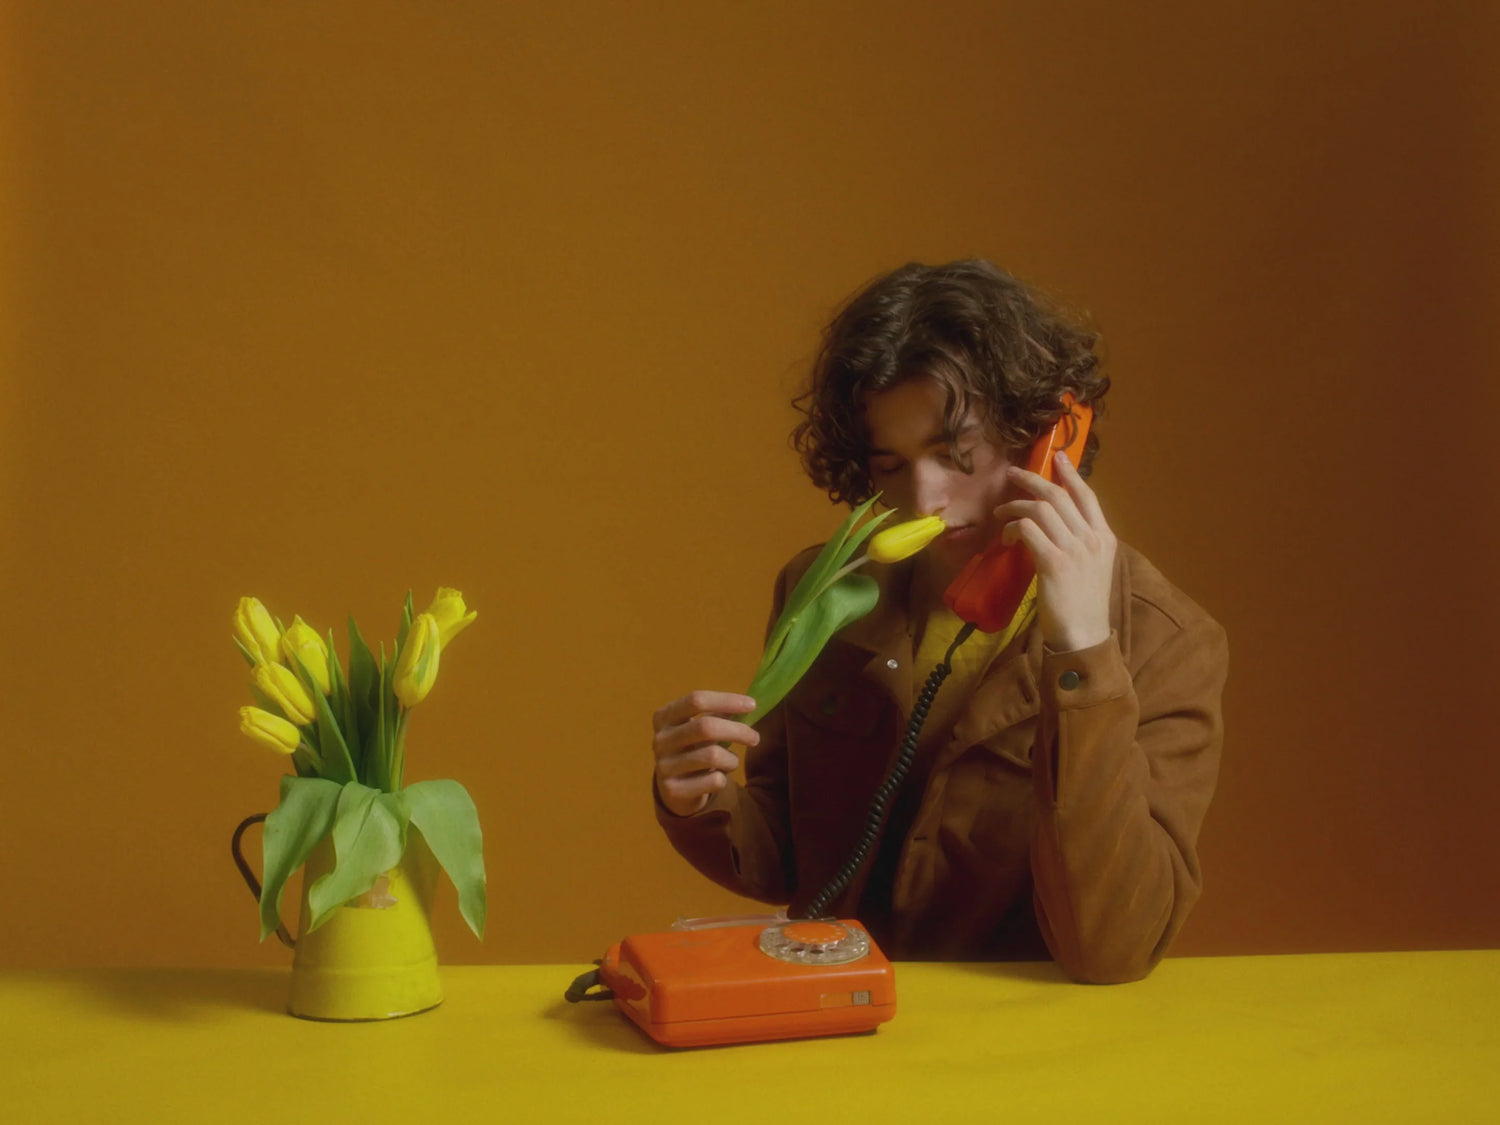 Young man smelling a yellow flower while holding a telephone